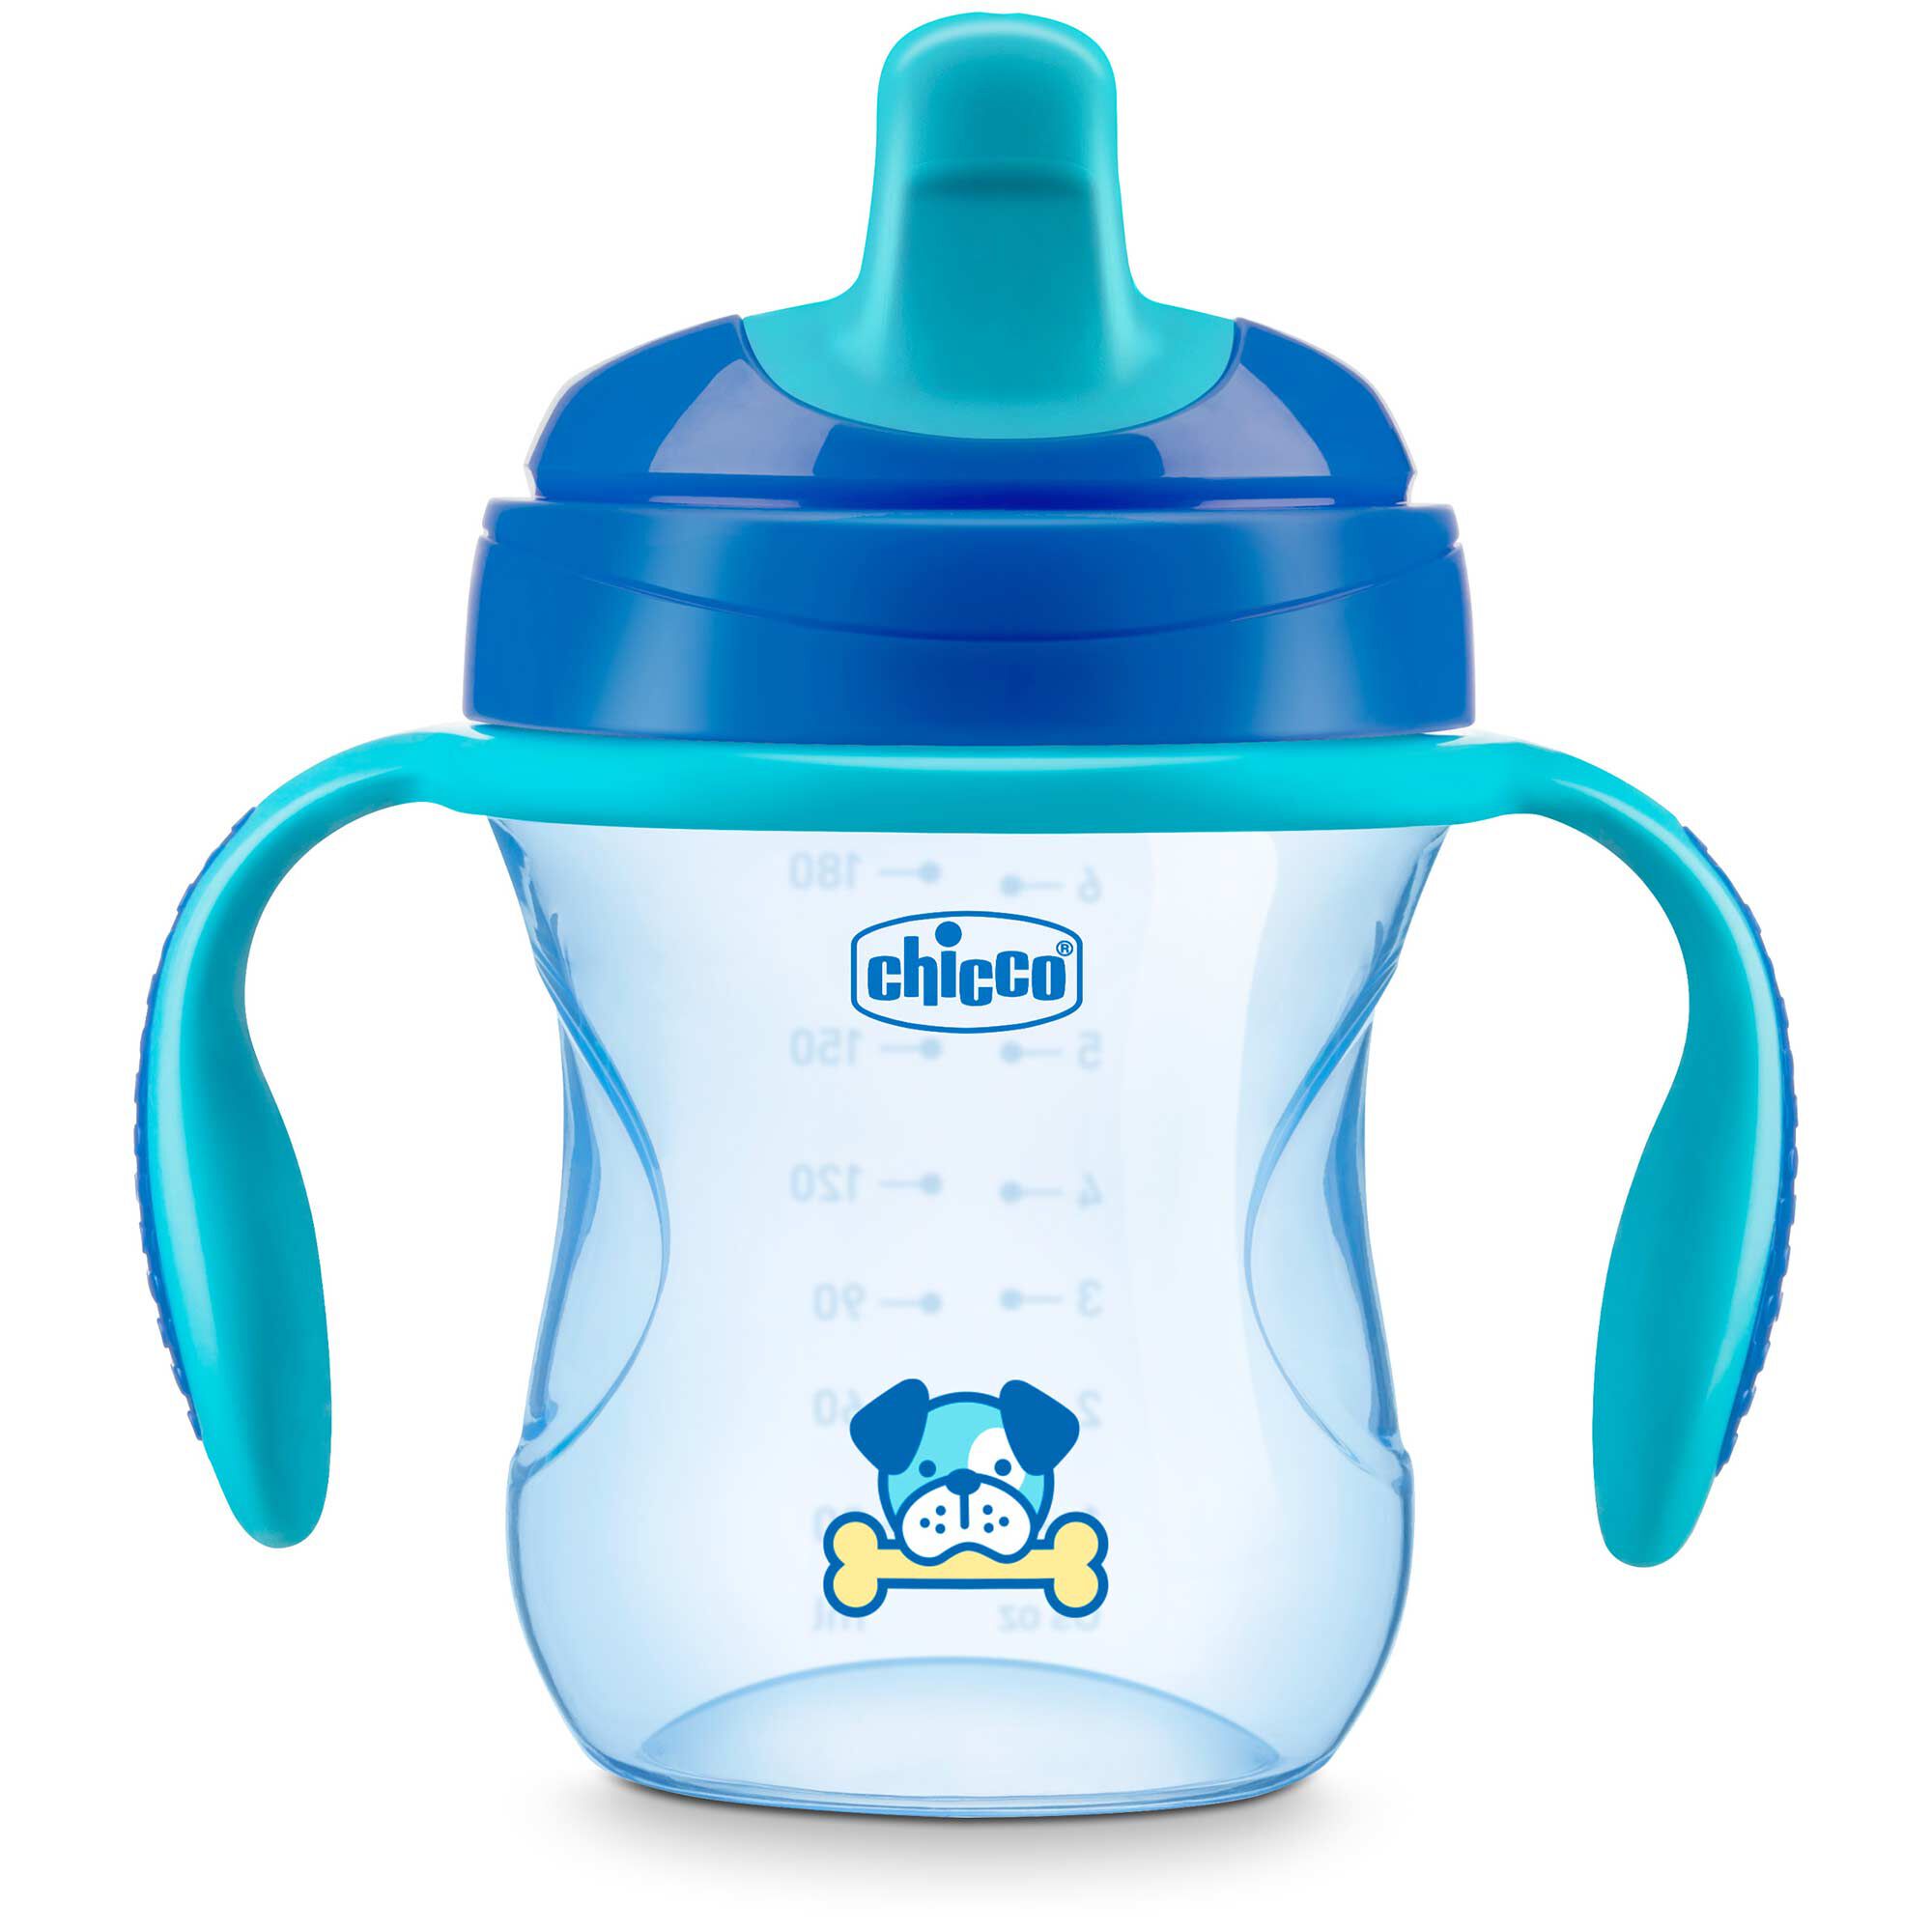 https://www.chiccousa.com/dw/image/v2/AAMT_PRD/on/demandware.static/-/Sites-chicco_catalog/default/dwb96714a5/images/products/Nursing/Cups/chicco-semi-soft-spout-trainer-cup-7oz-6m-blue.jpg?sw=2000&sh=2000&sm=fit